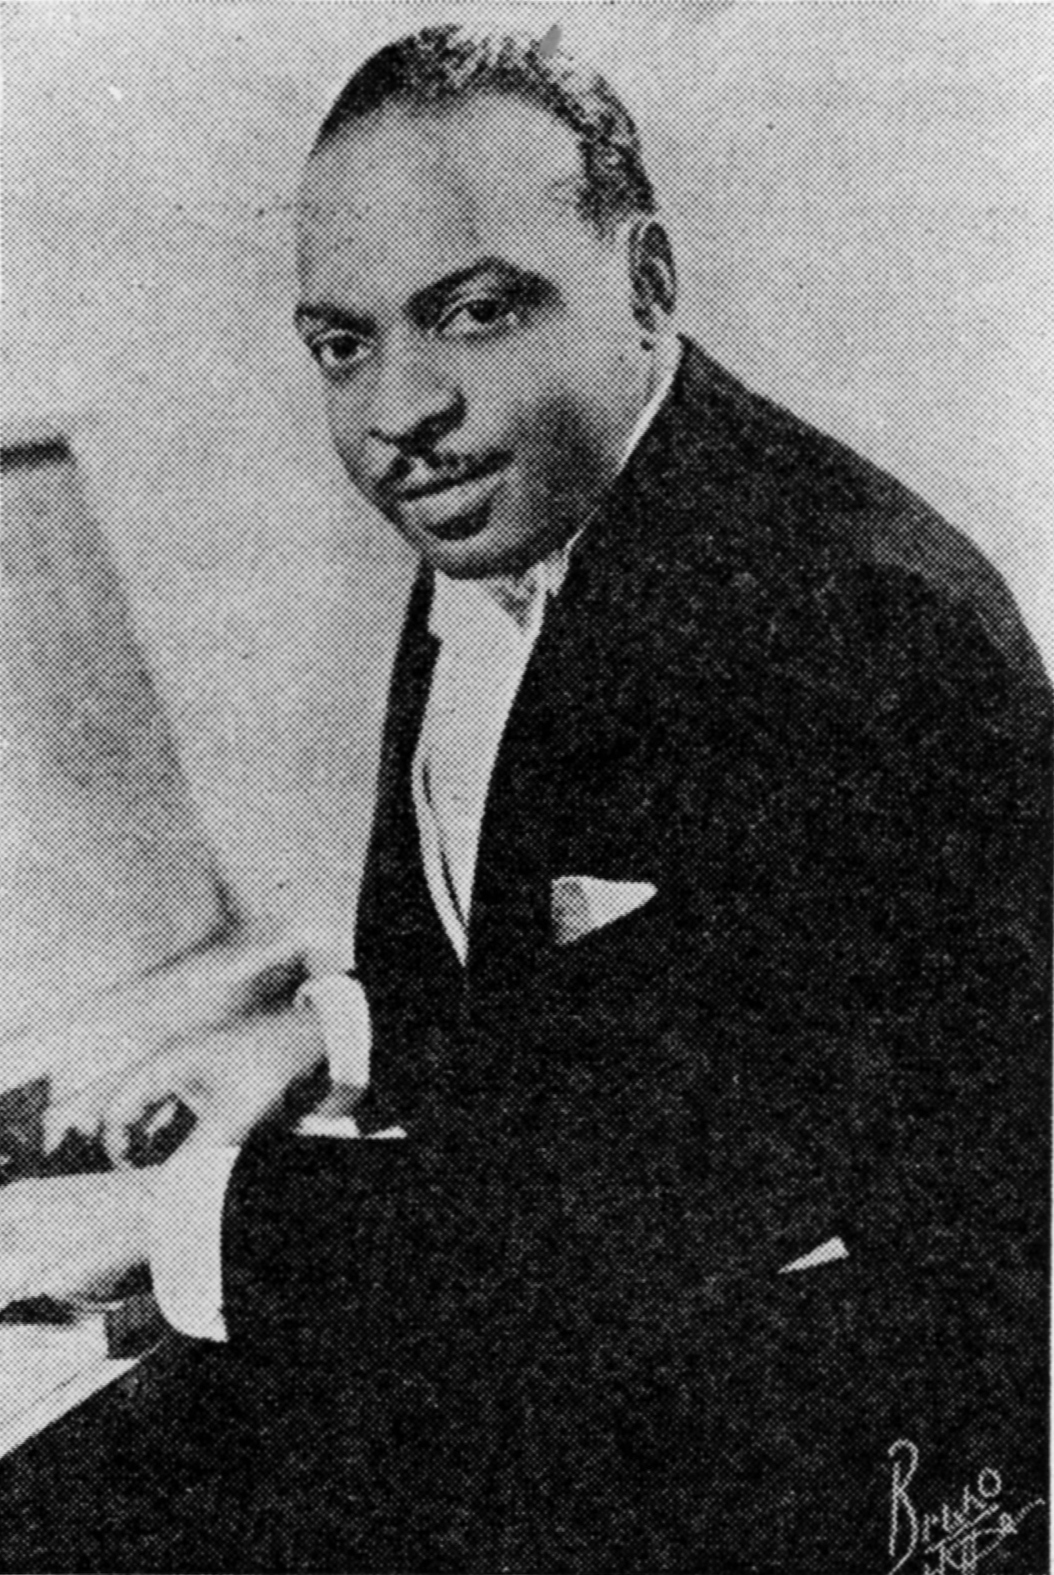 photograph of Count Basie at the piano